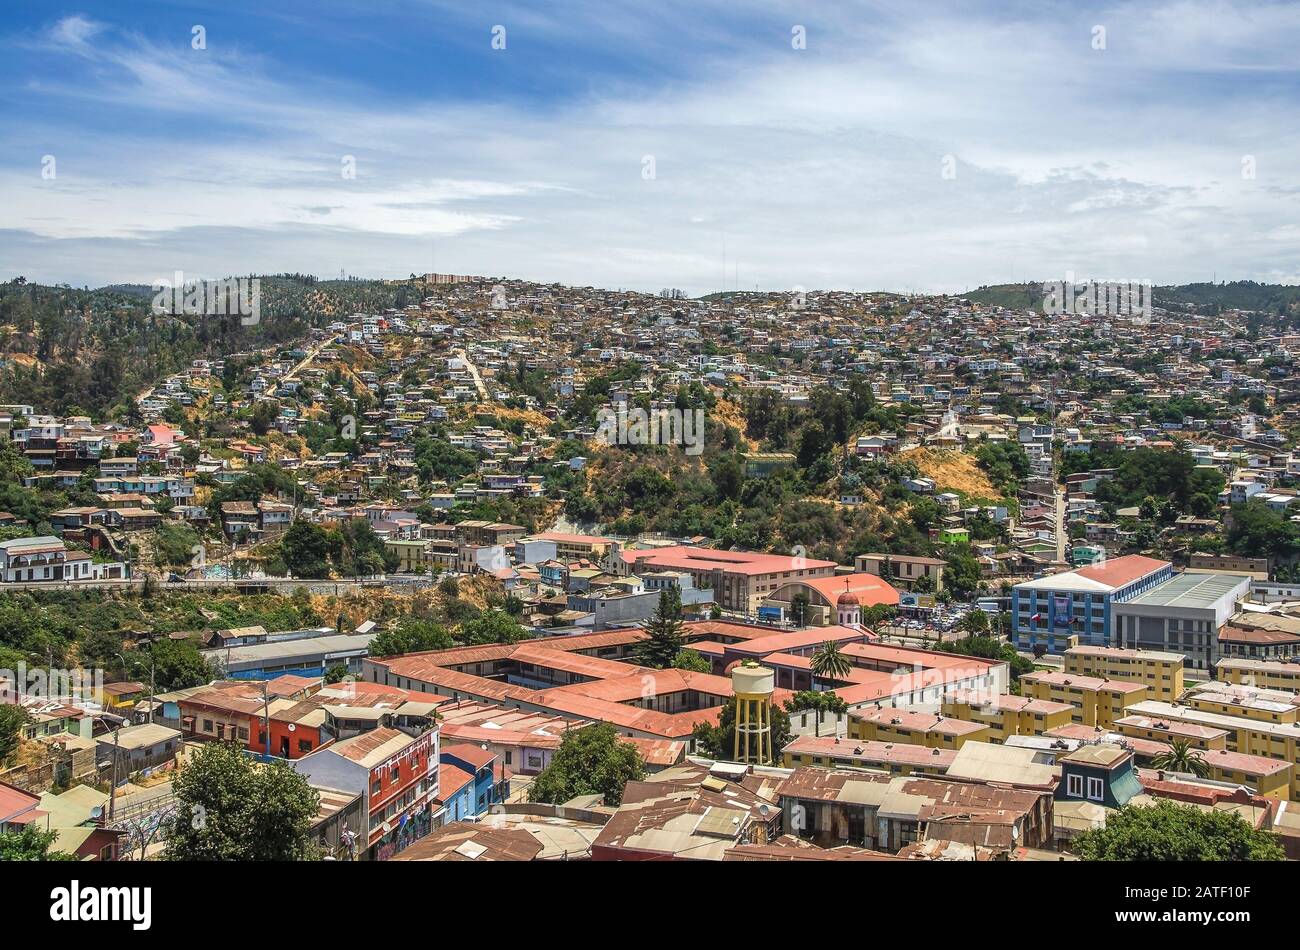 VALPARAISO, CHILE -31 DECEMBER,2015: Aerial view of Valparaiso, Chile. Beatiful lanscape of Valparaiso city at day time Stock Photo